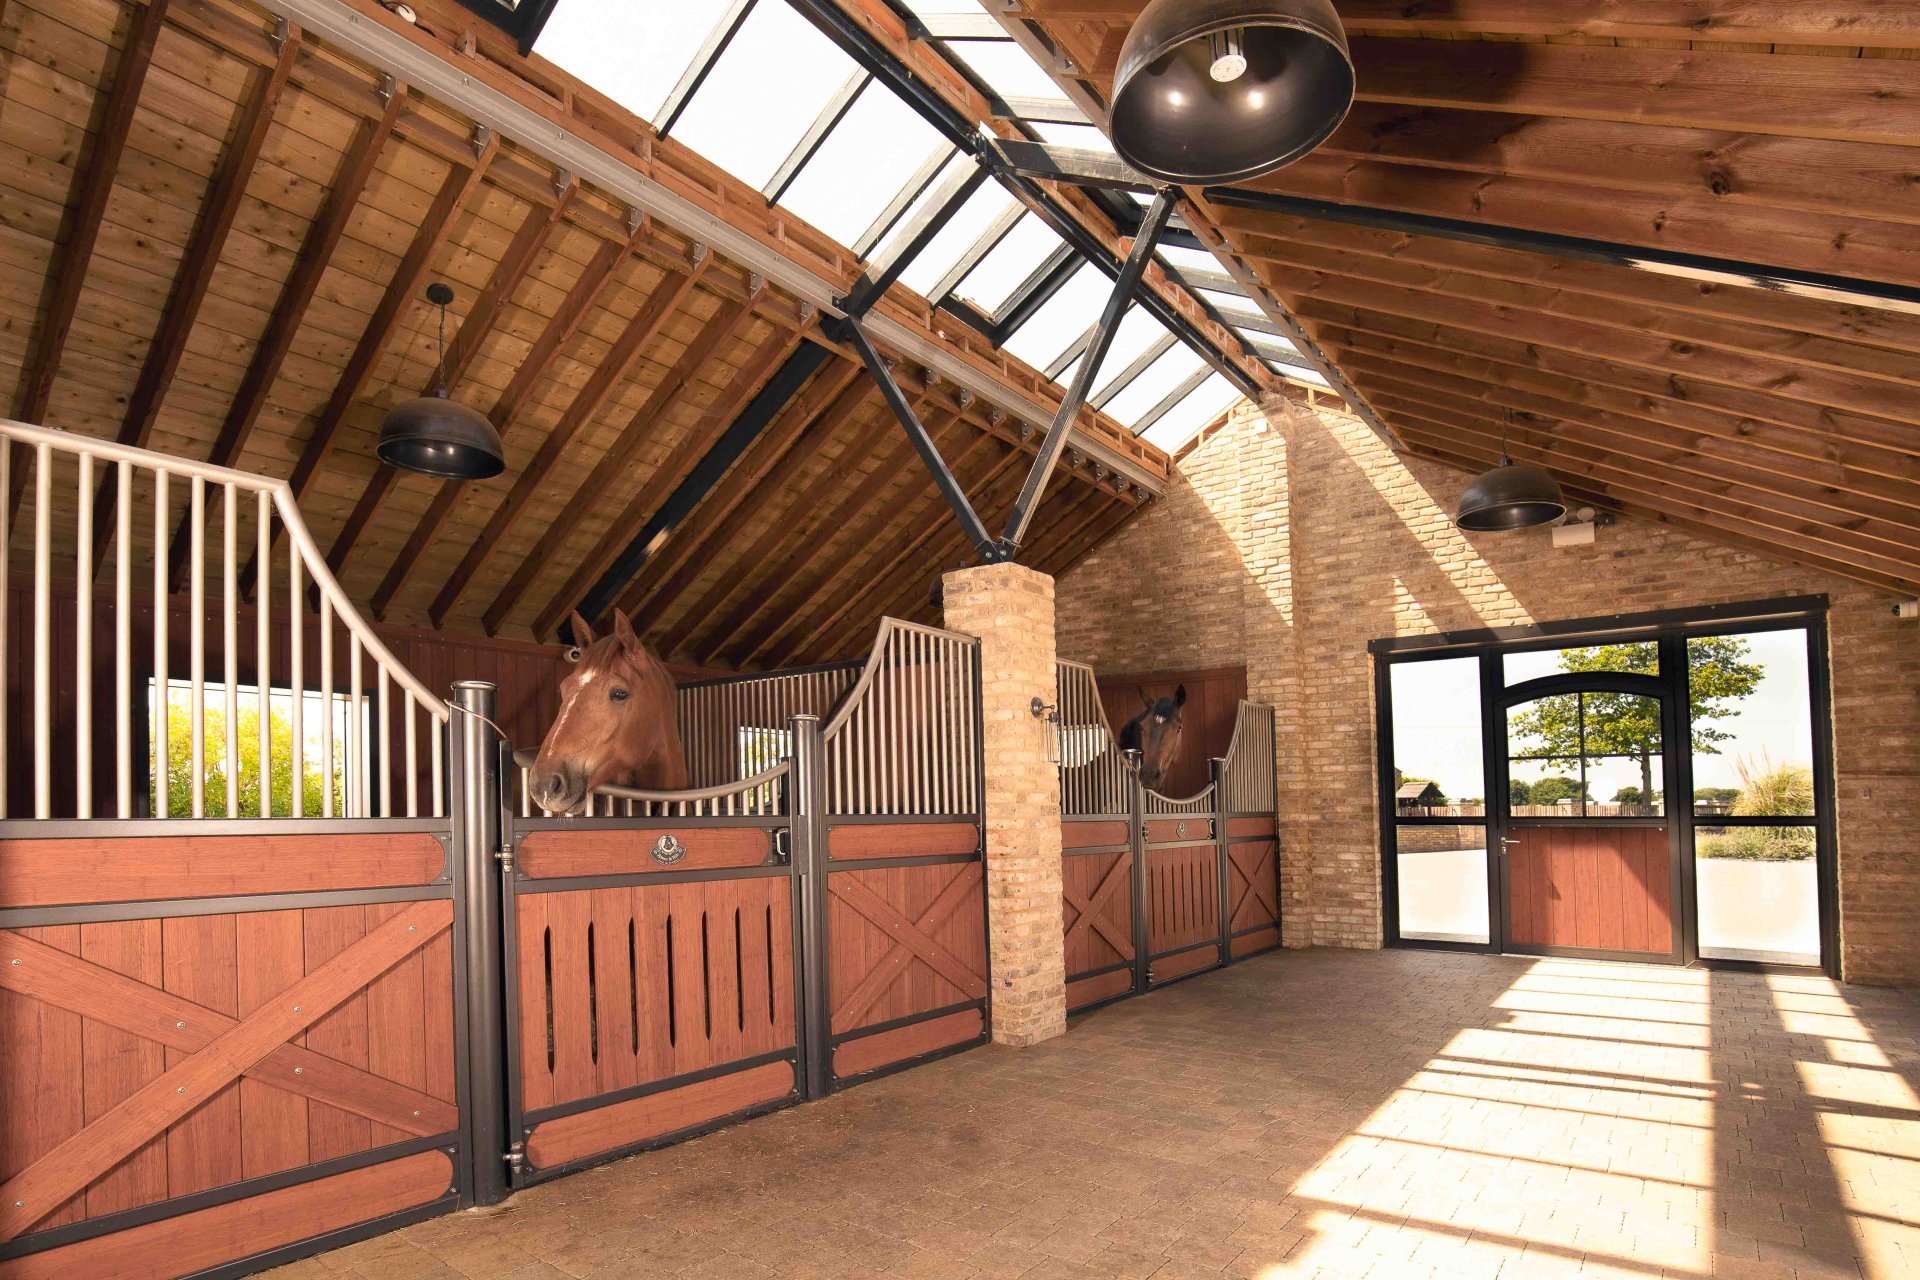 Stable aisle with individual horse stalls Bremen with powder coating and stainless steel top grille